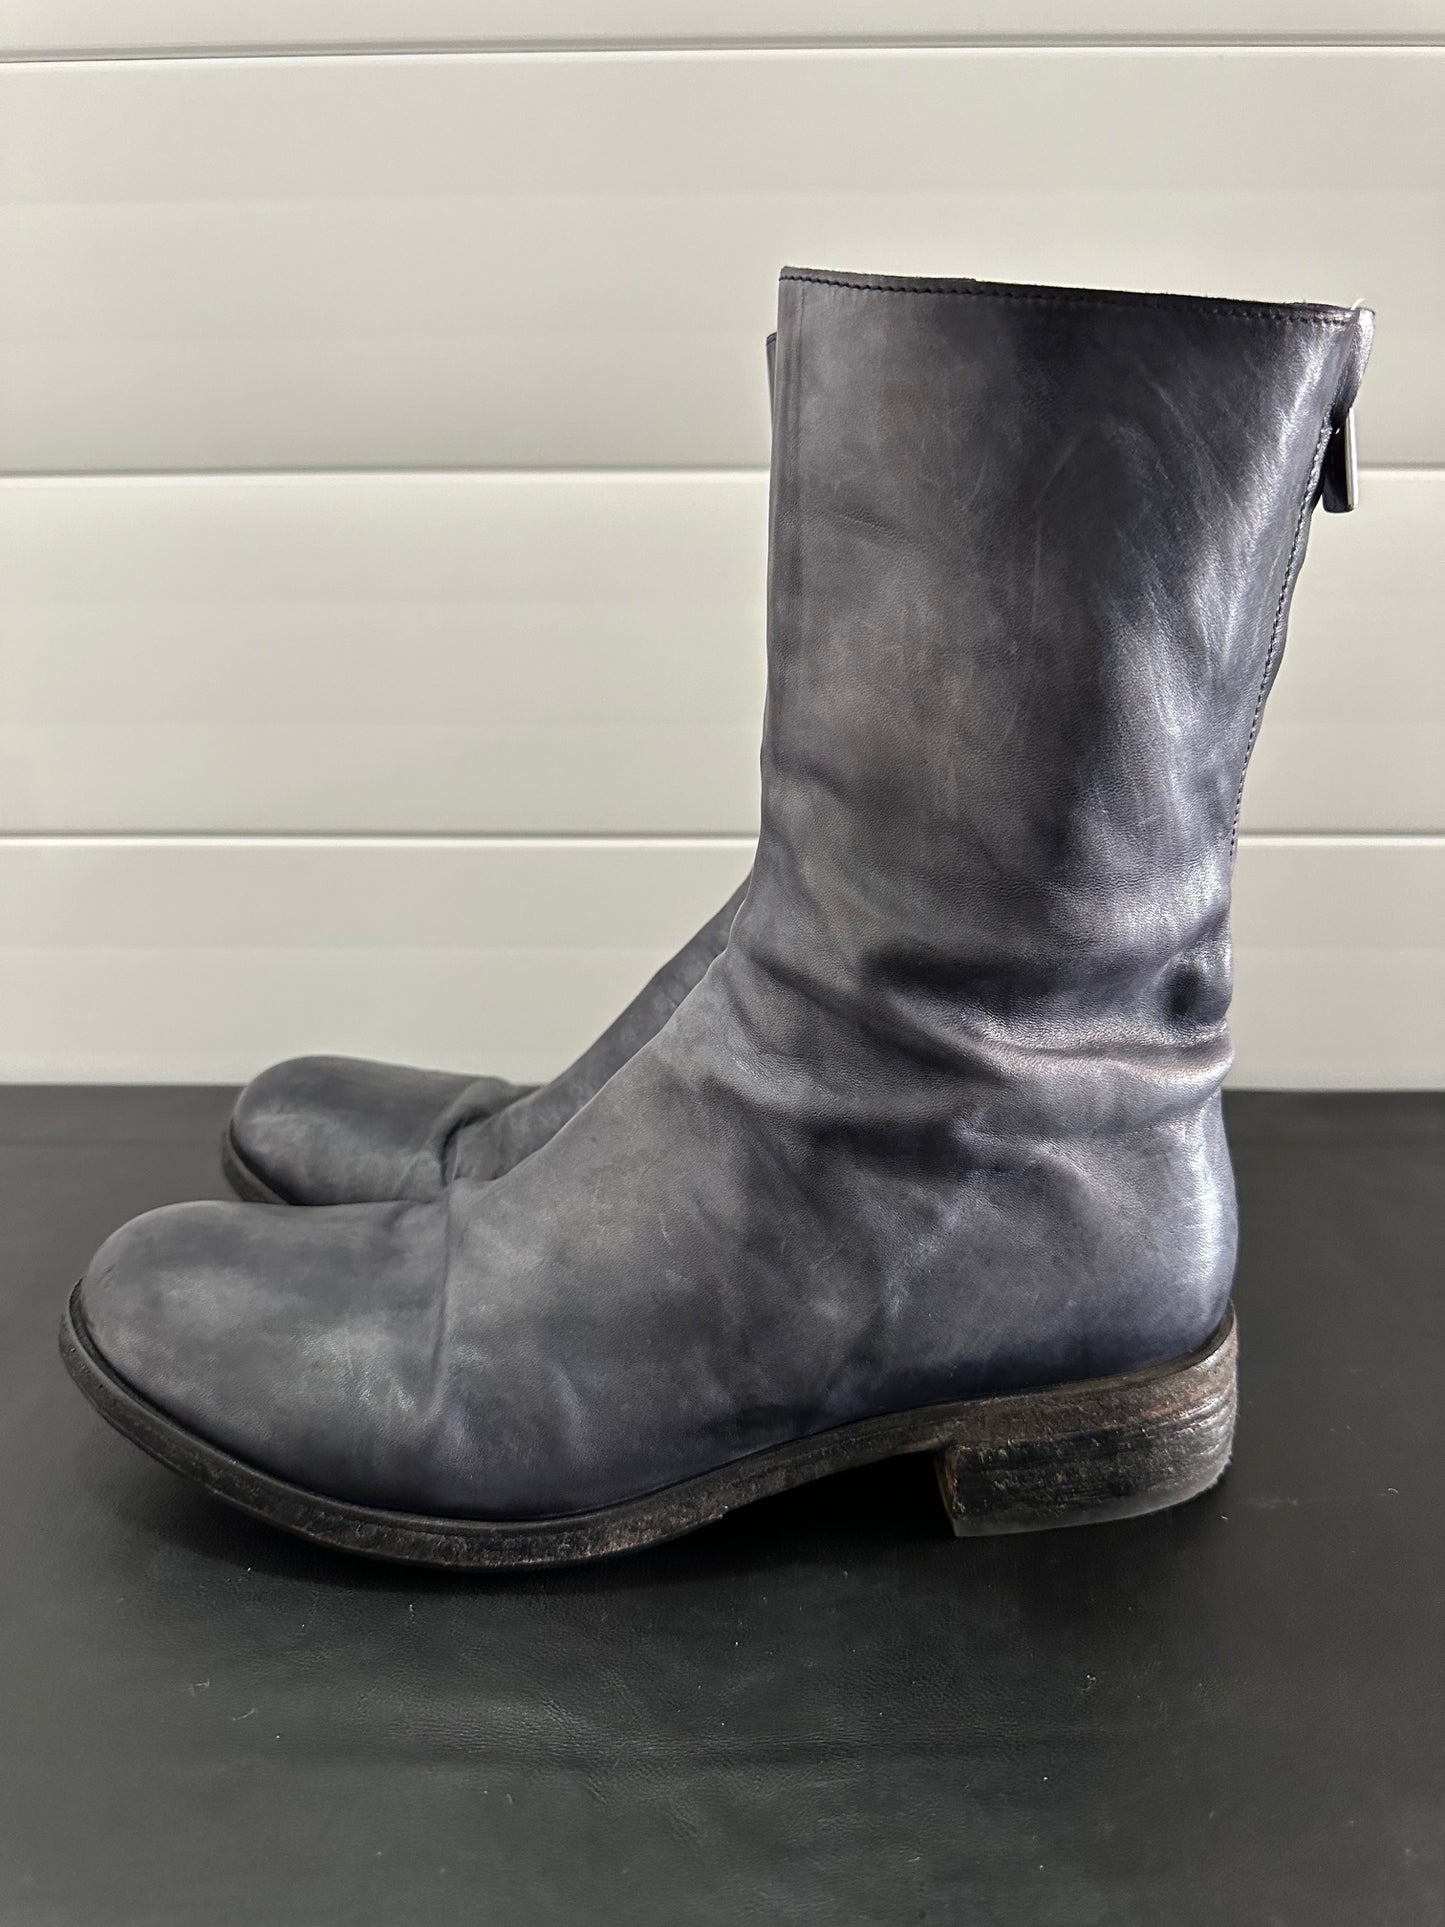 Vintage Black Grey One Piece Horse Leather Diagonal Zipper Boots by A1923